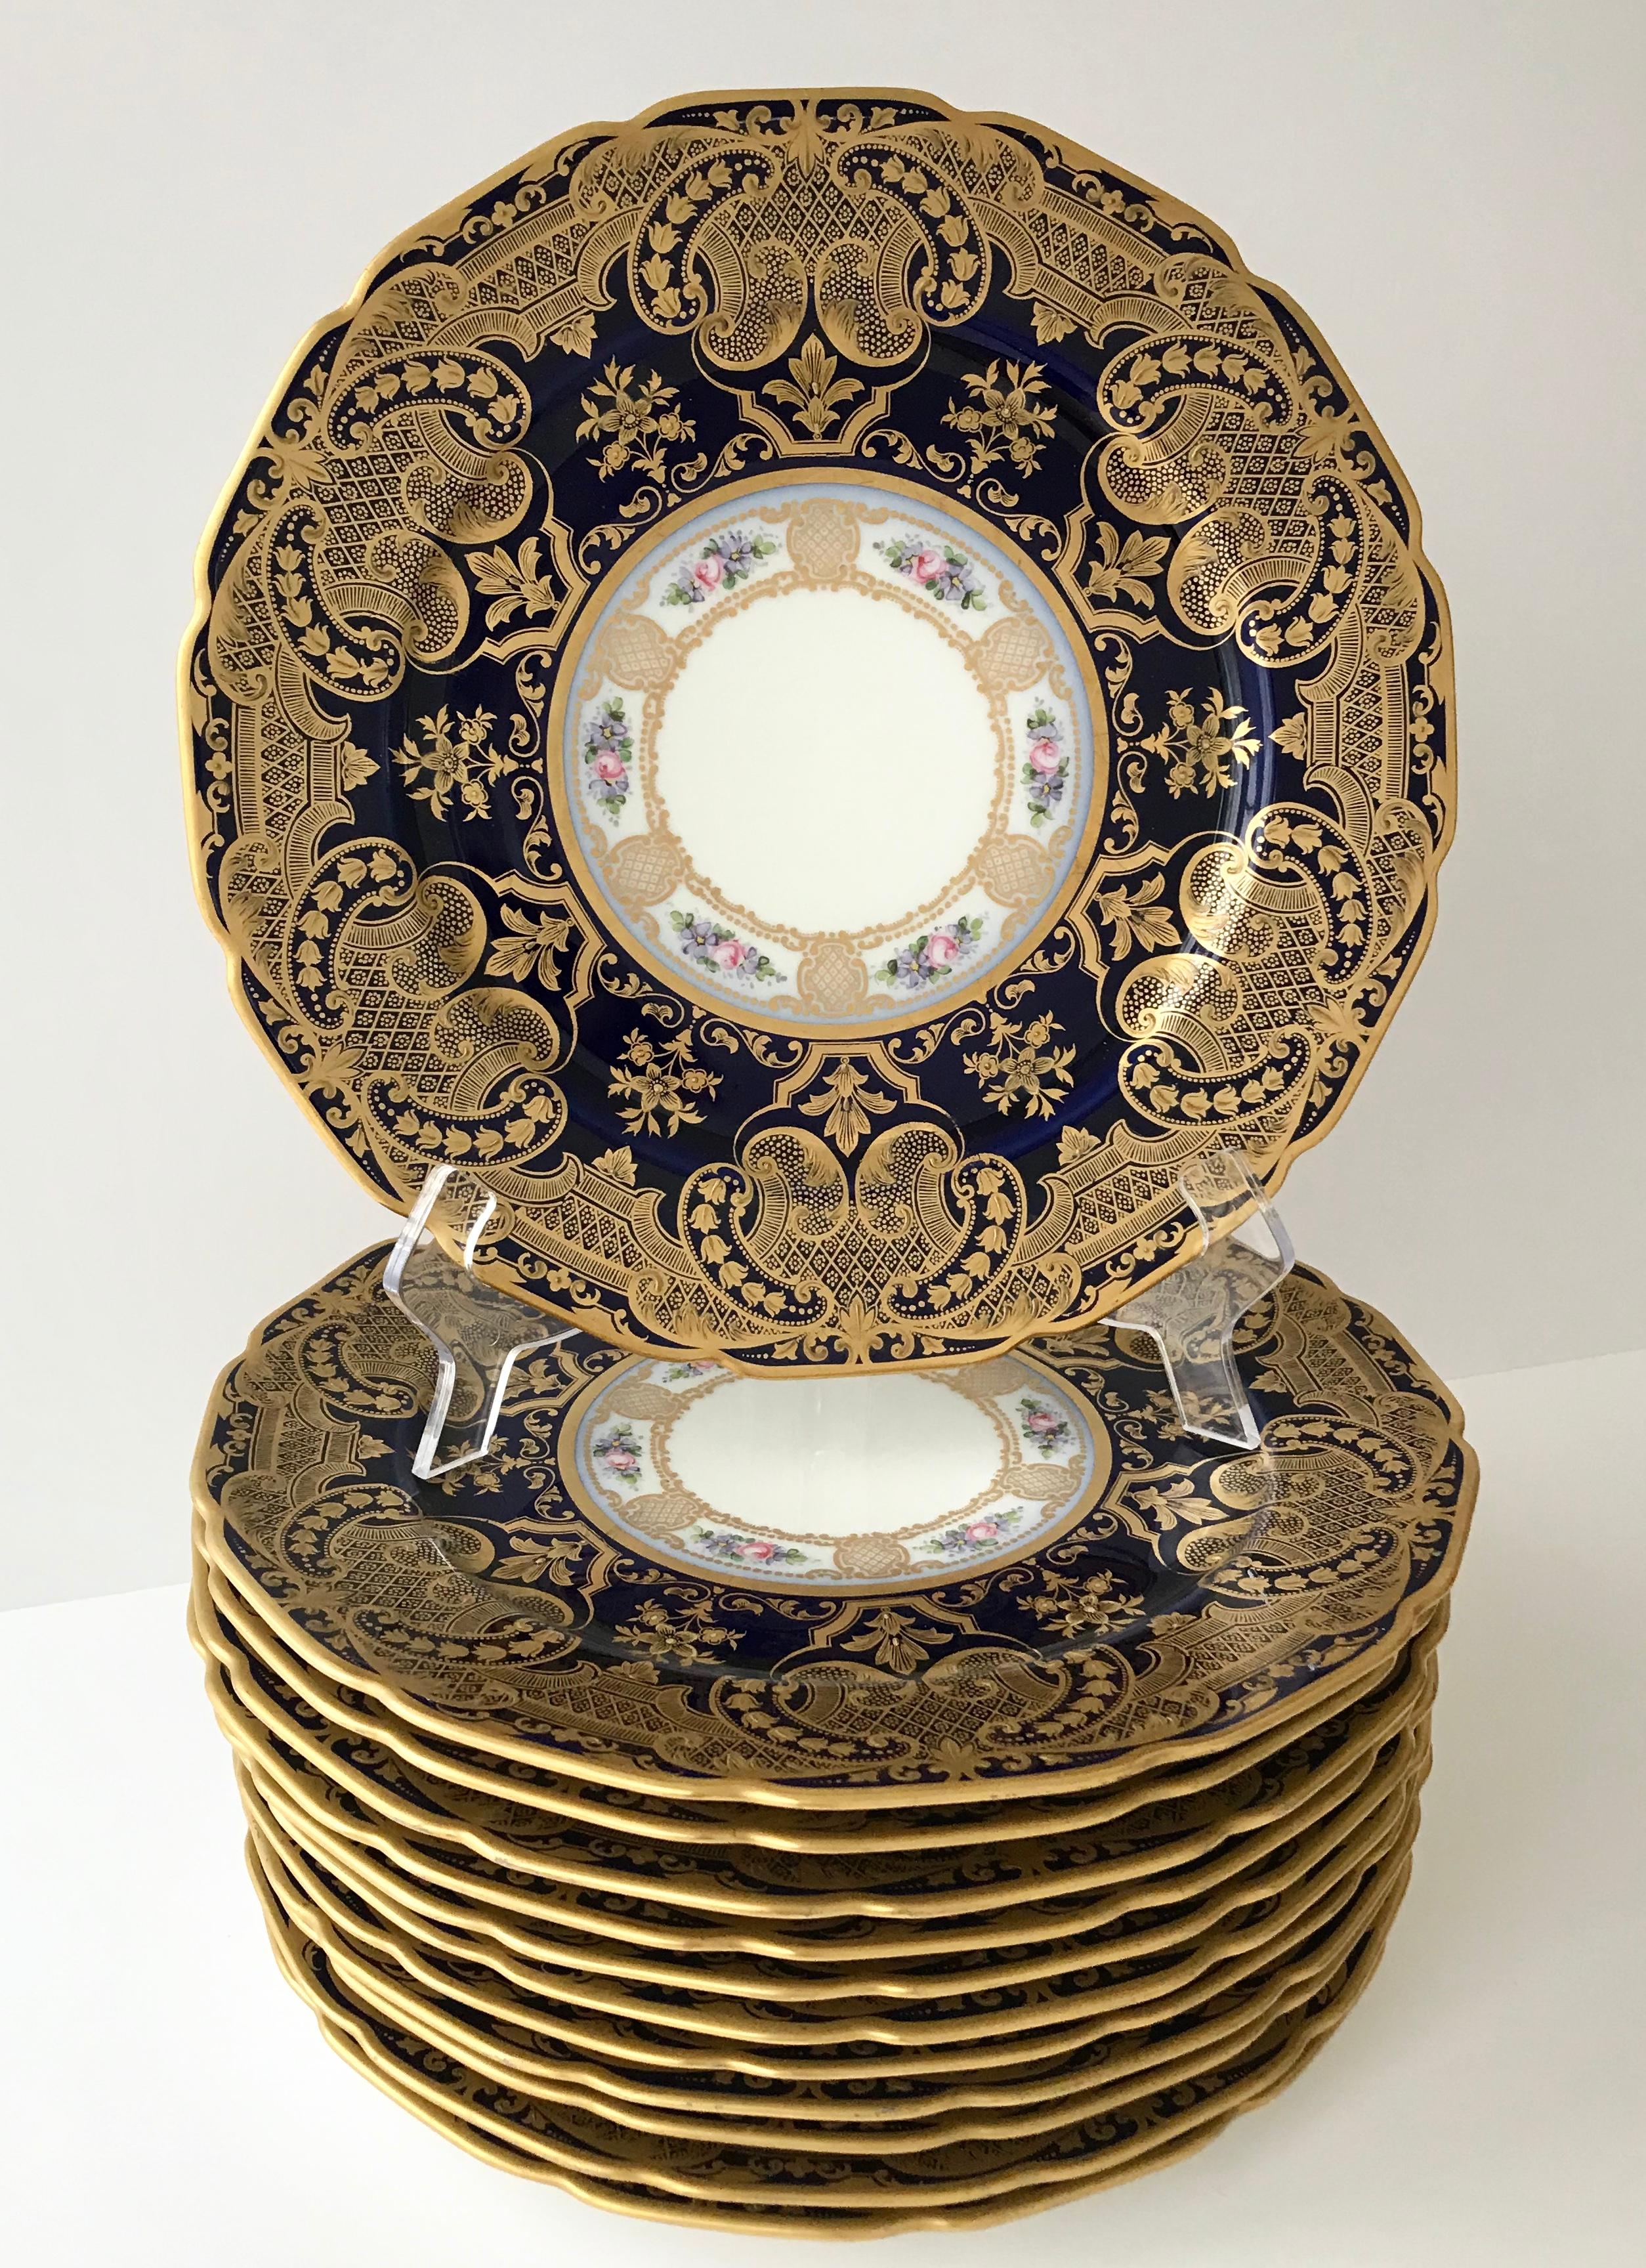 Set of 12 Cobalt and Gilt Limoges Dinner Plates in Arabesque Design, circa 1900 In Excellent Condition For Sale In Essex, MA